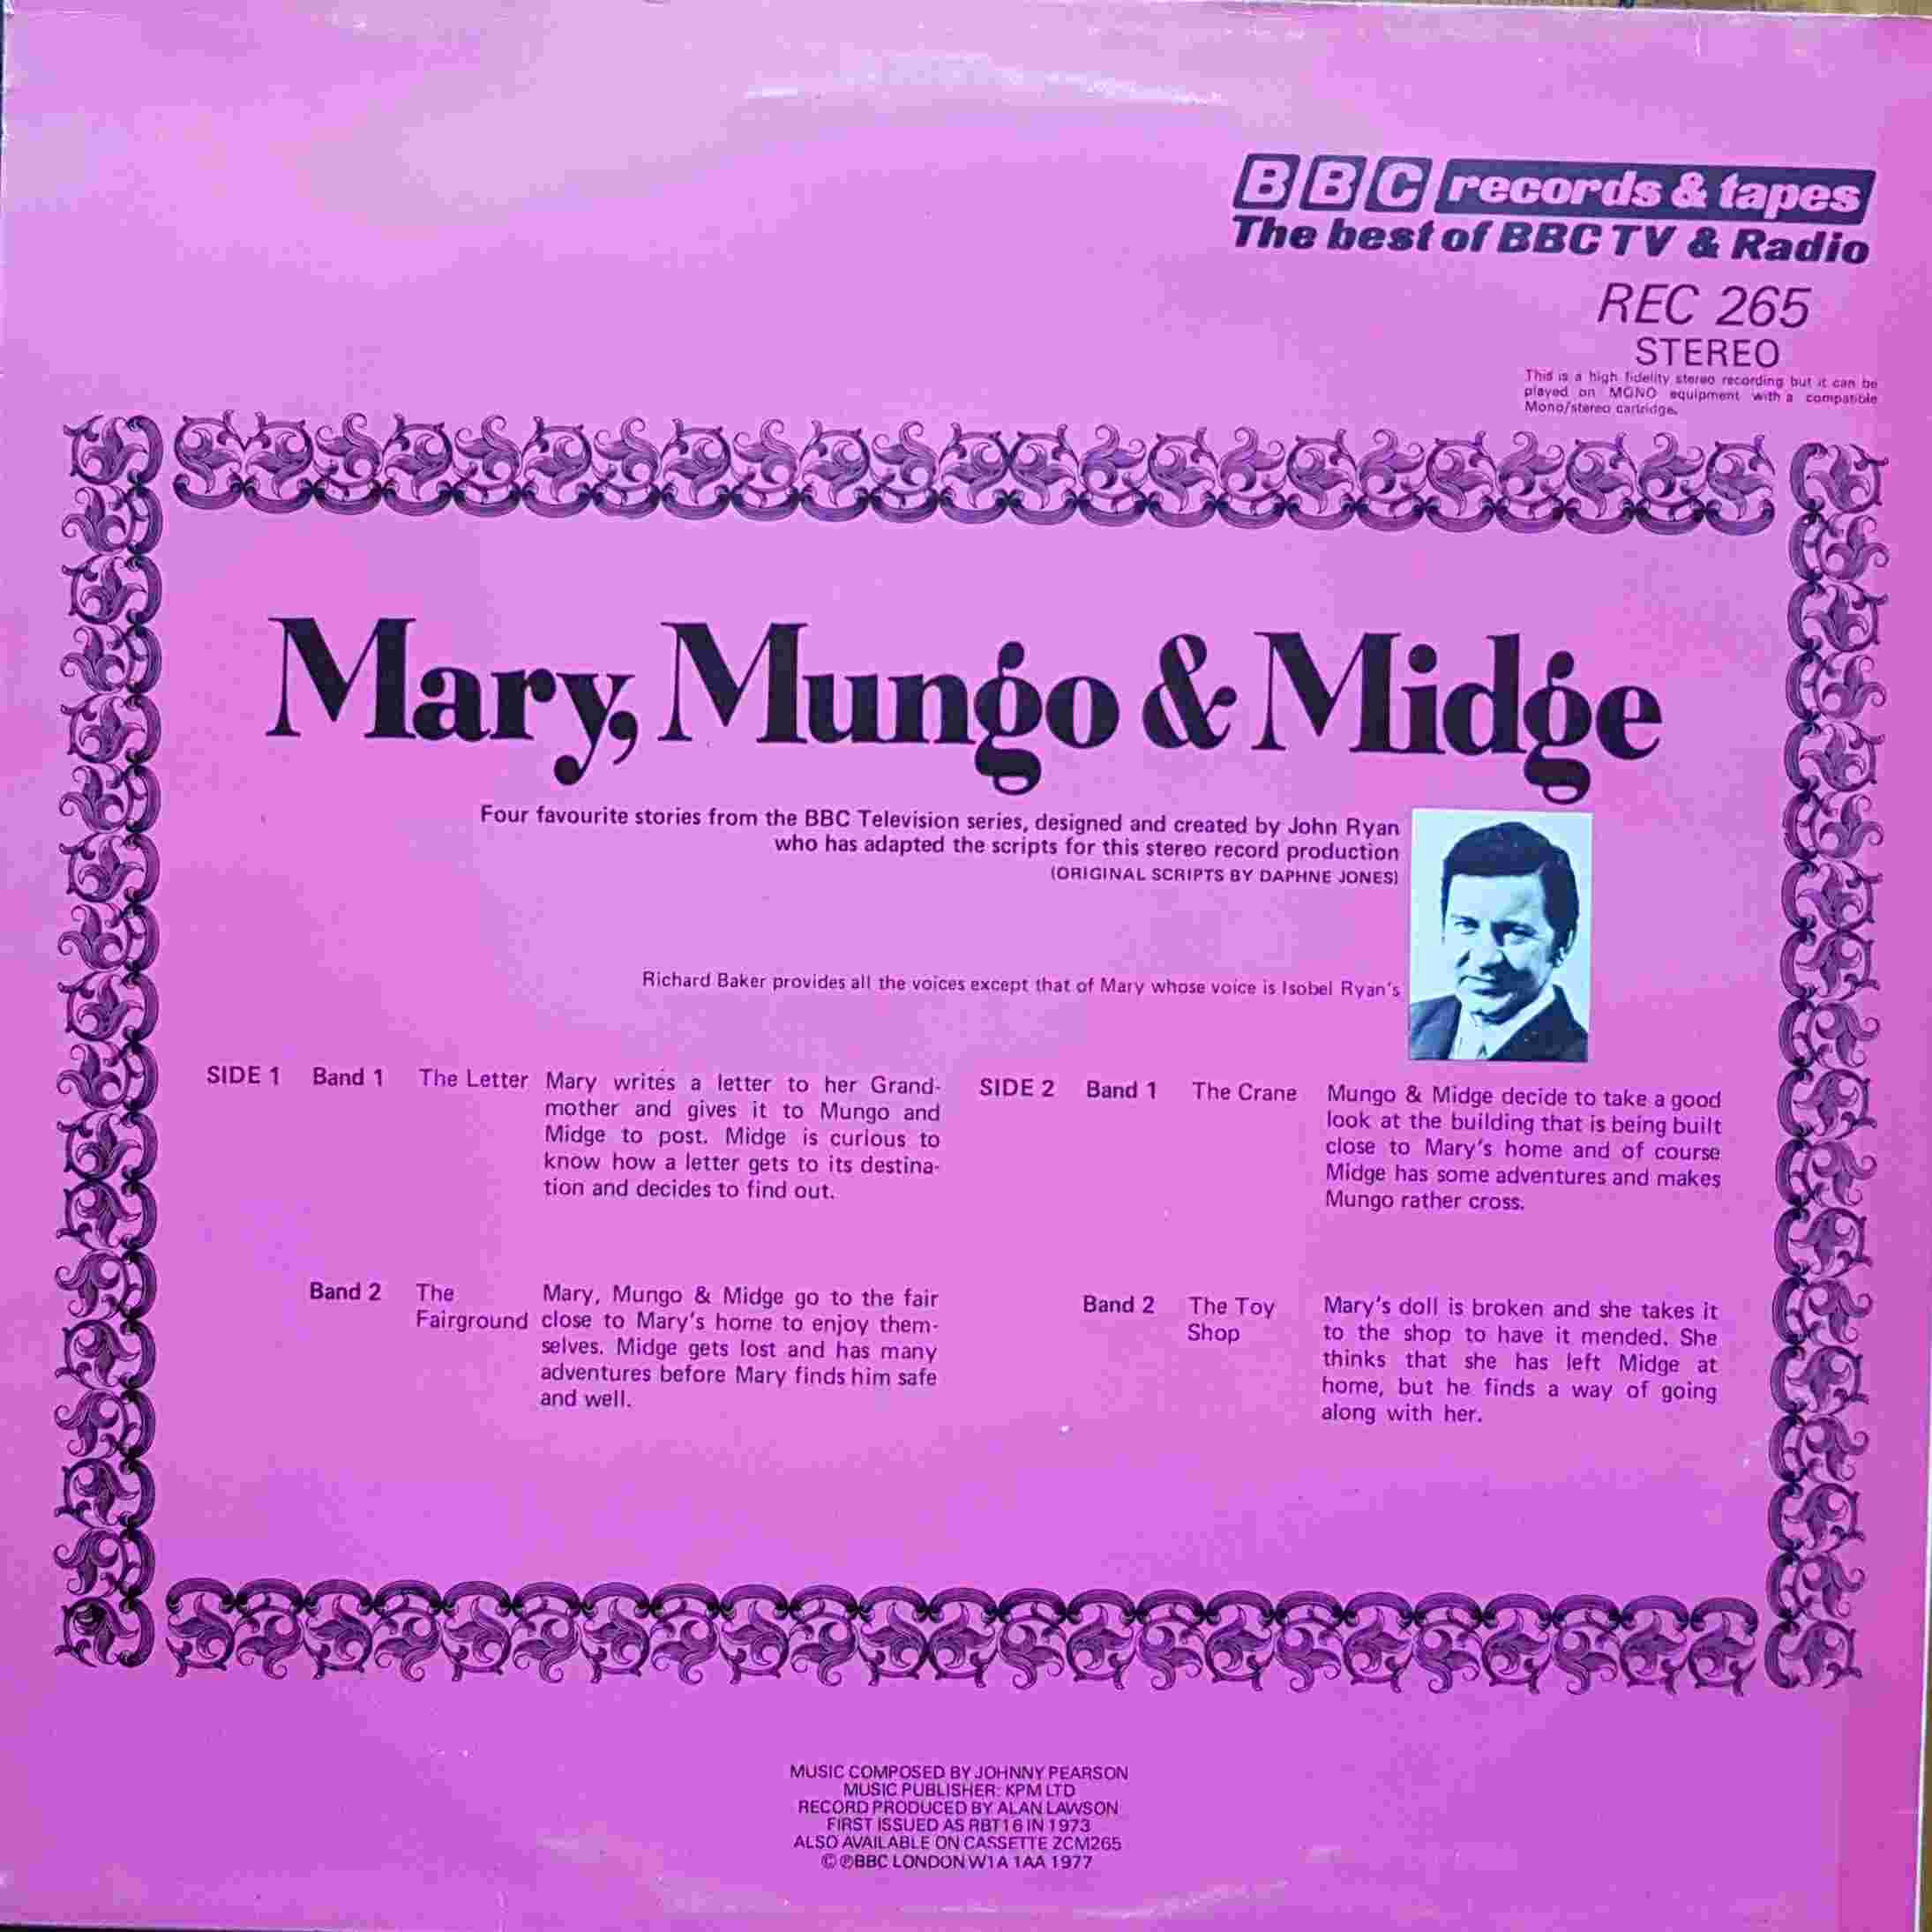 Picture of REC 265 Mary, Mungo and Midge by artist Daphne Jones / John Ryan from the BBC records and Tapes library